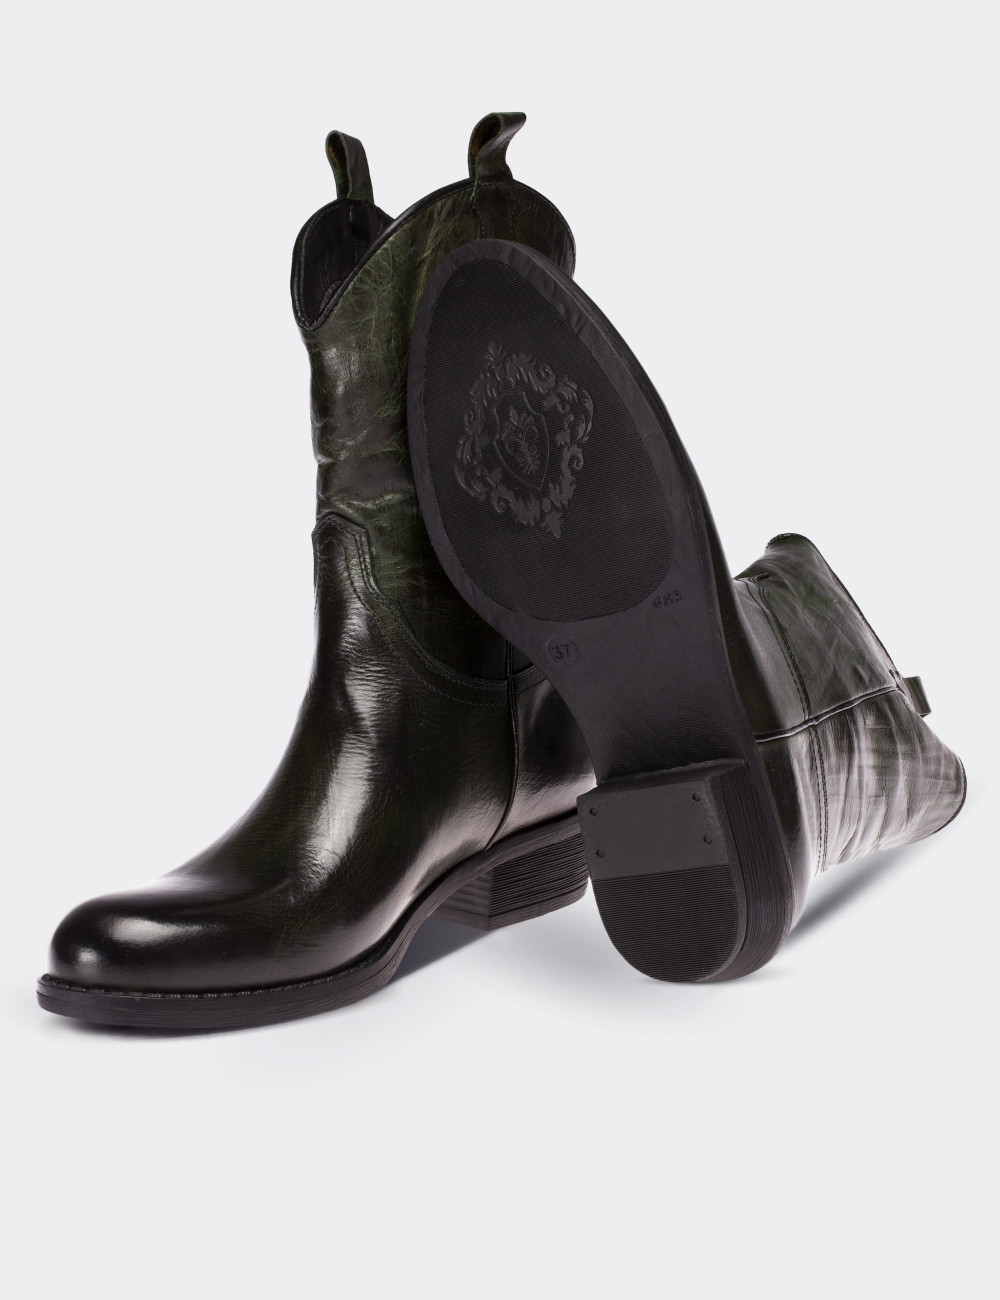 Green  Leather Western Boots - 01308ZYSLC01